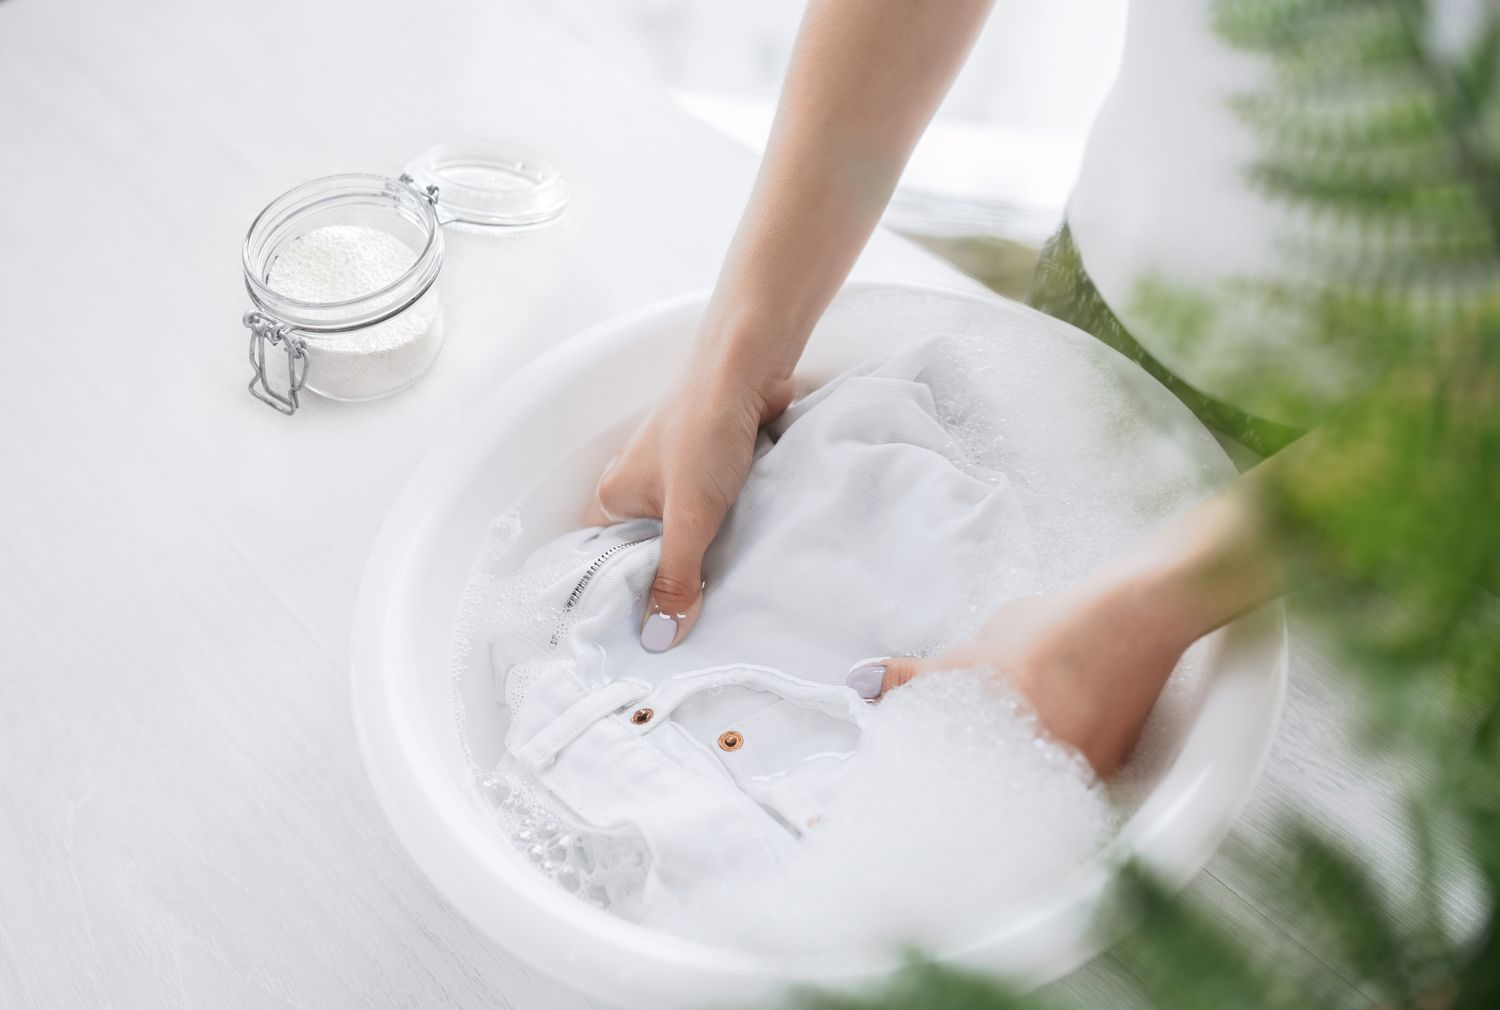 White jeans soaking in cool water with oxygen based bleach in glass container